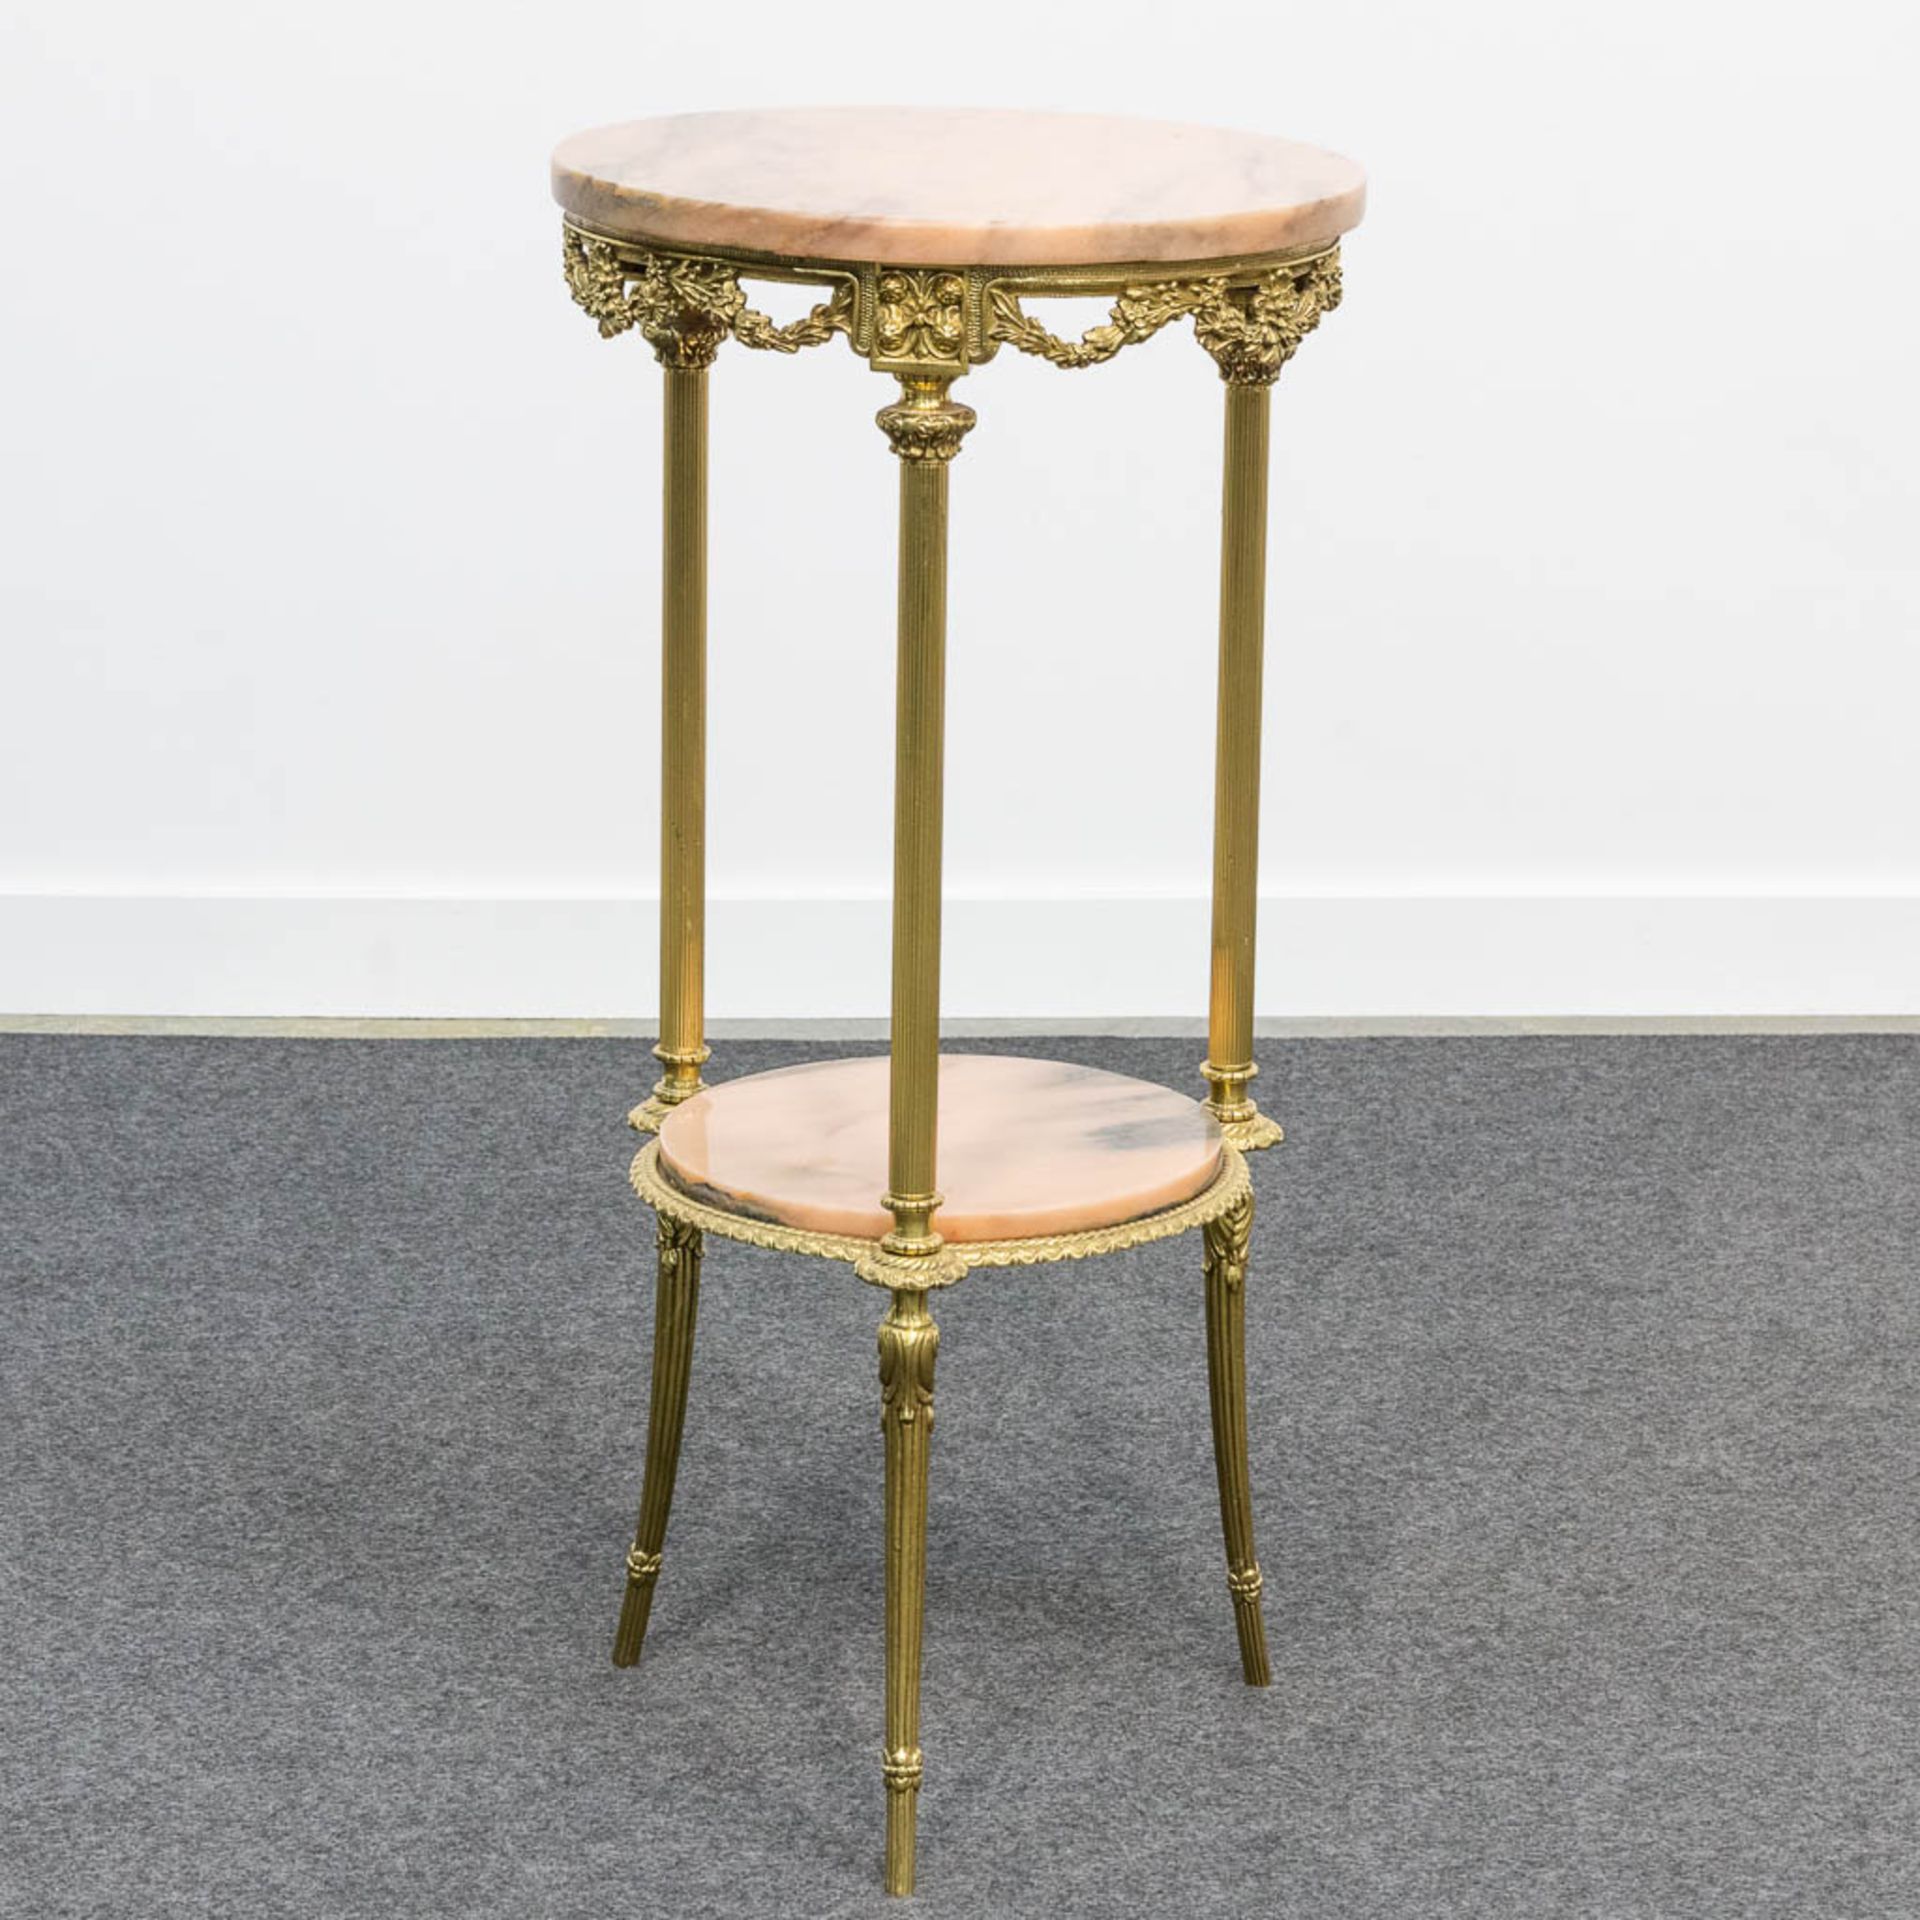 A two-tier side table made of bronze and with pink marble tops. (72 x 34,5 cm) - Bild 2 aus 12